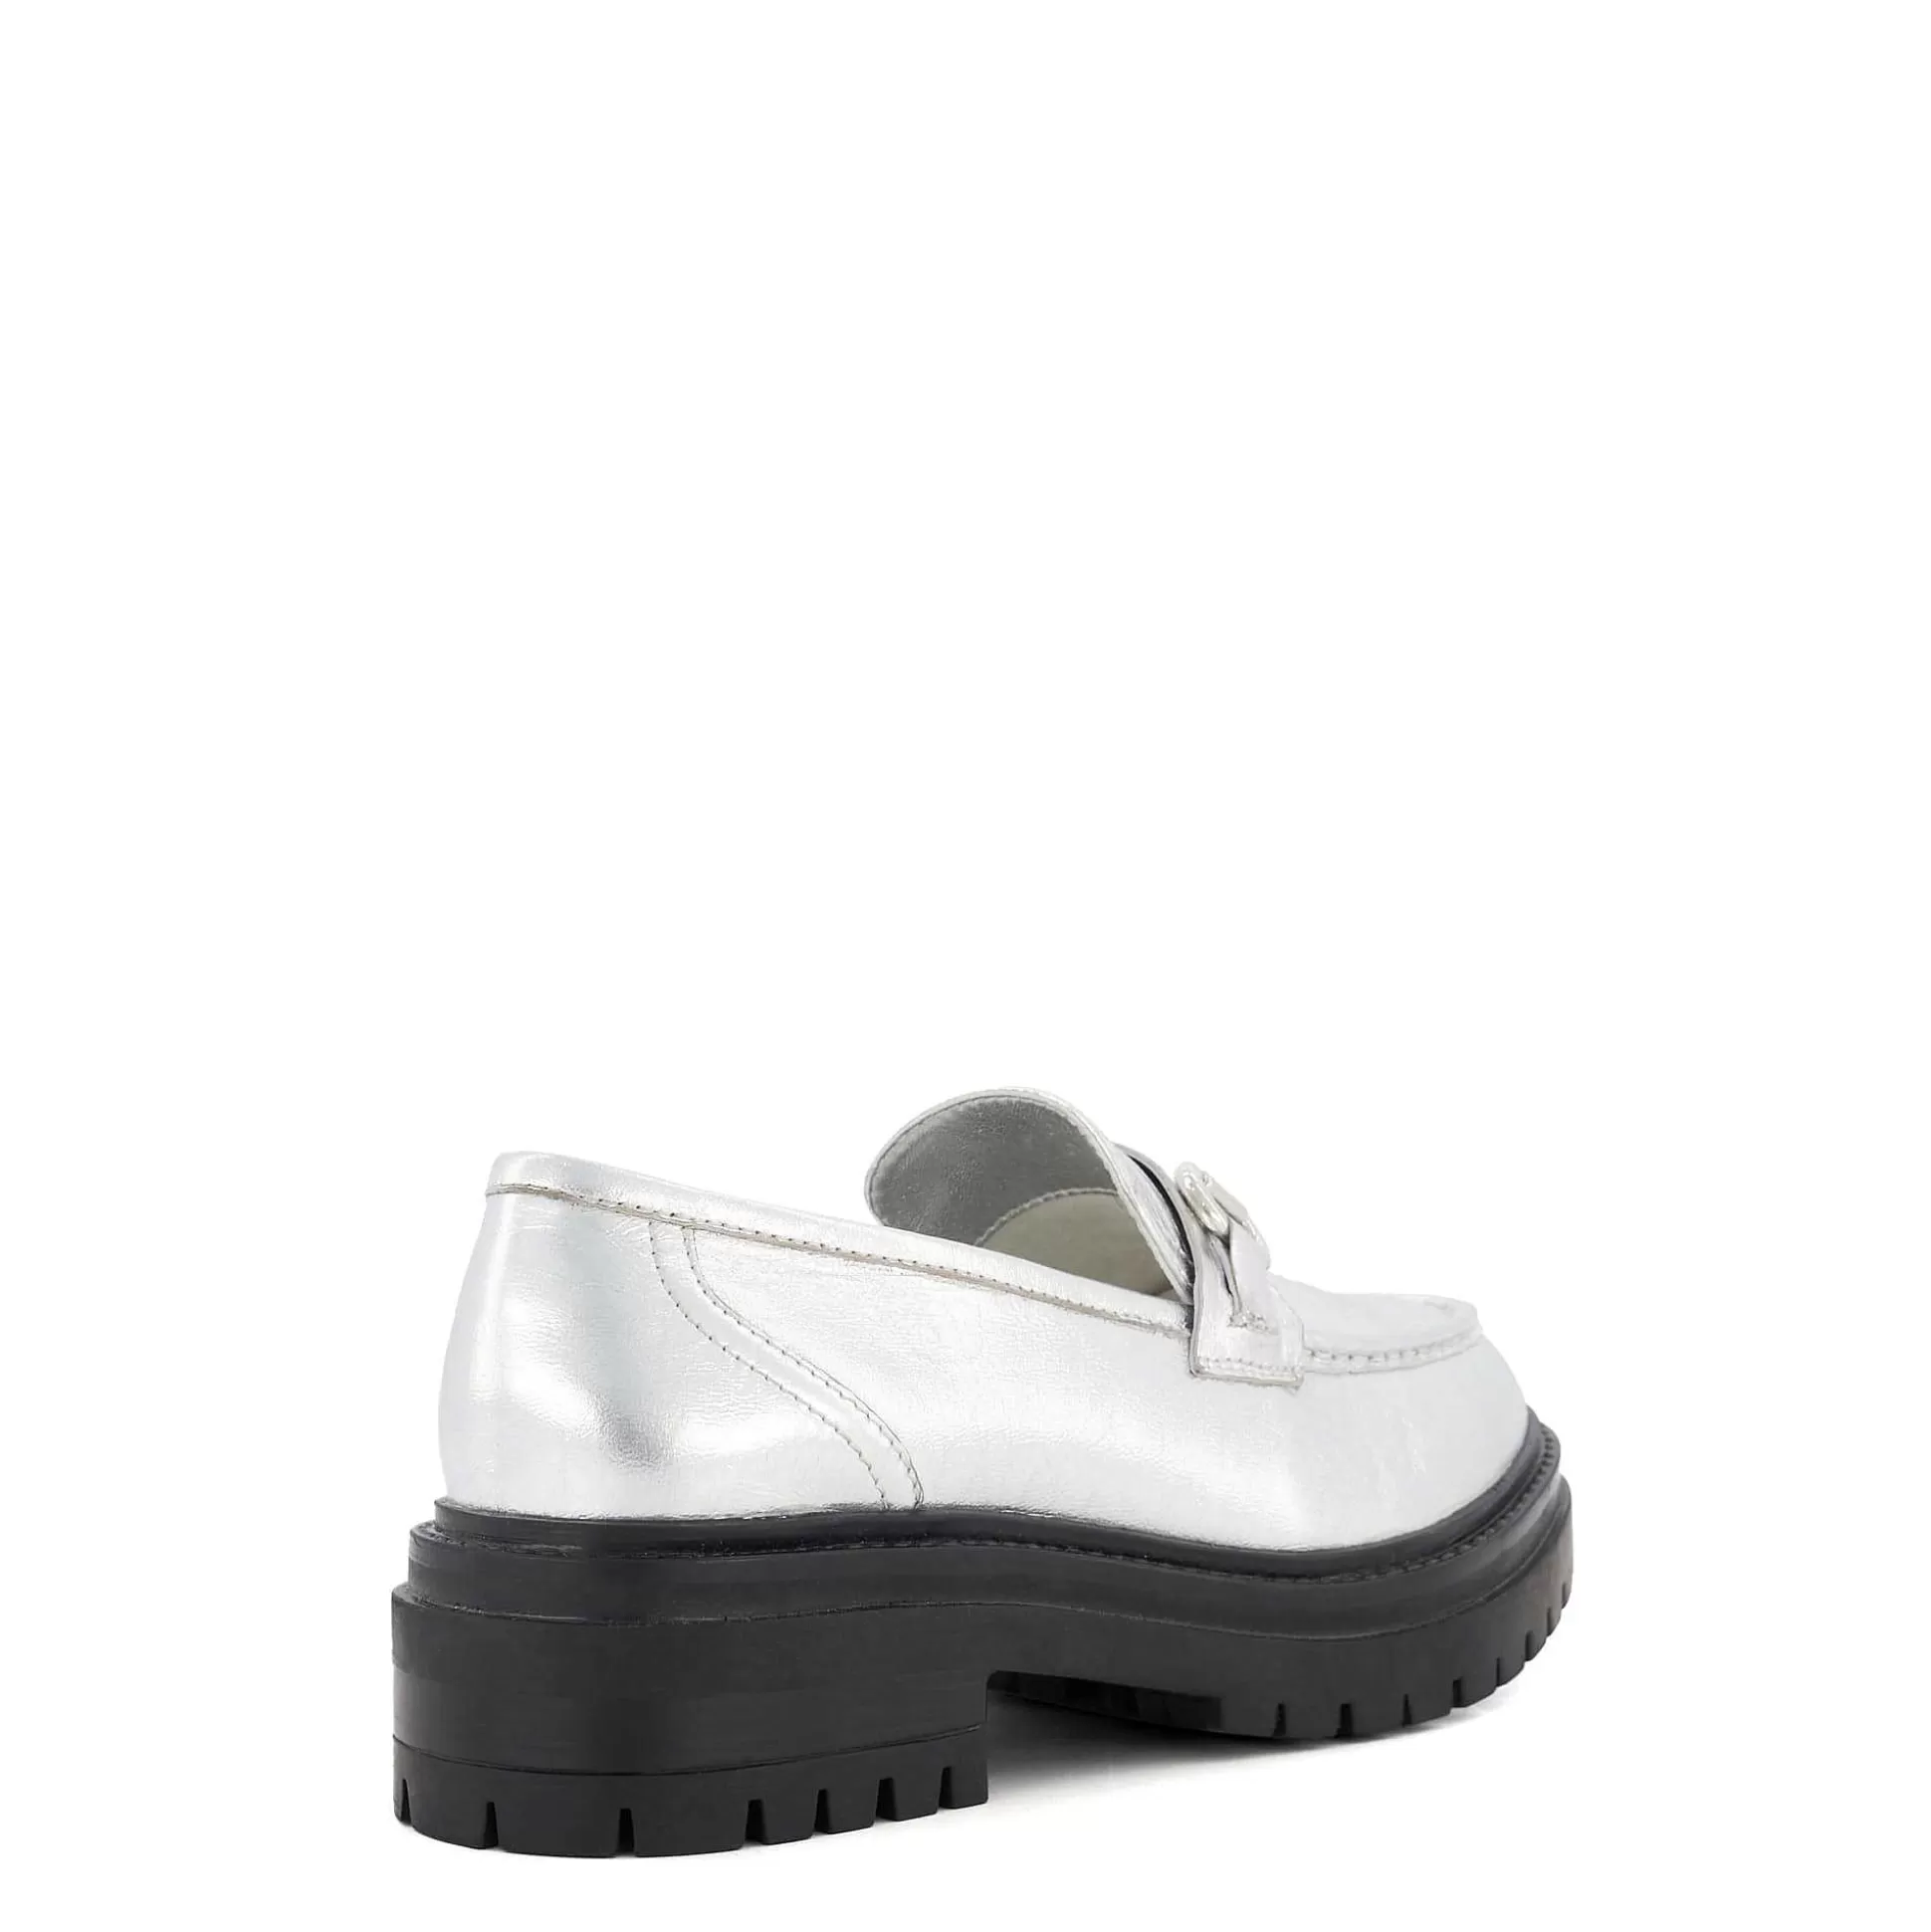 Dune London GALLAGHER - SILVER-Women Flat Shoes | Loafers